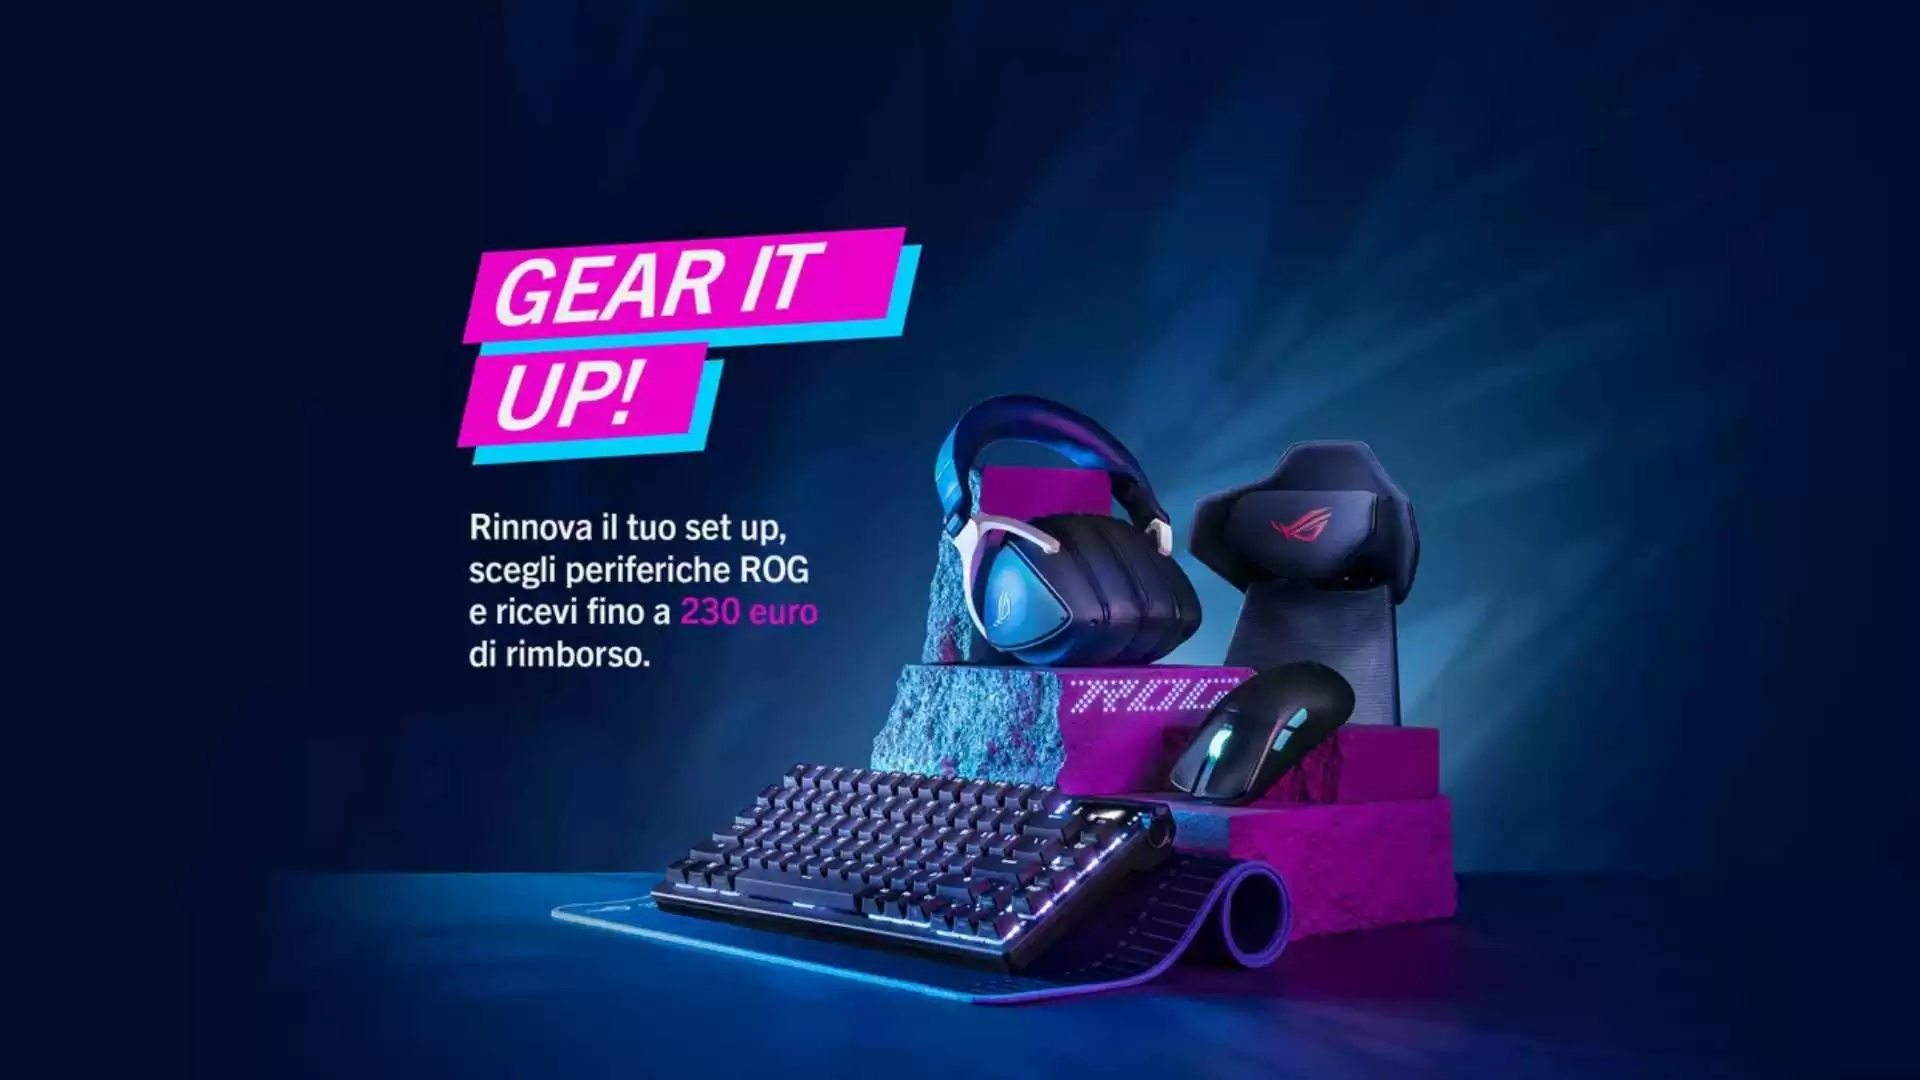 ASUS ROG Gear It Up